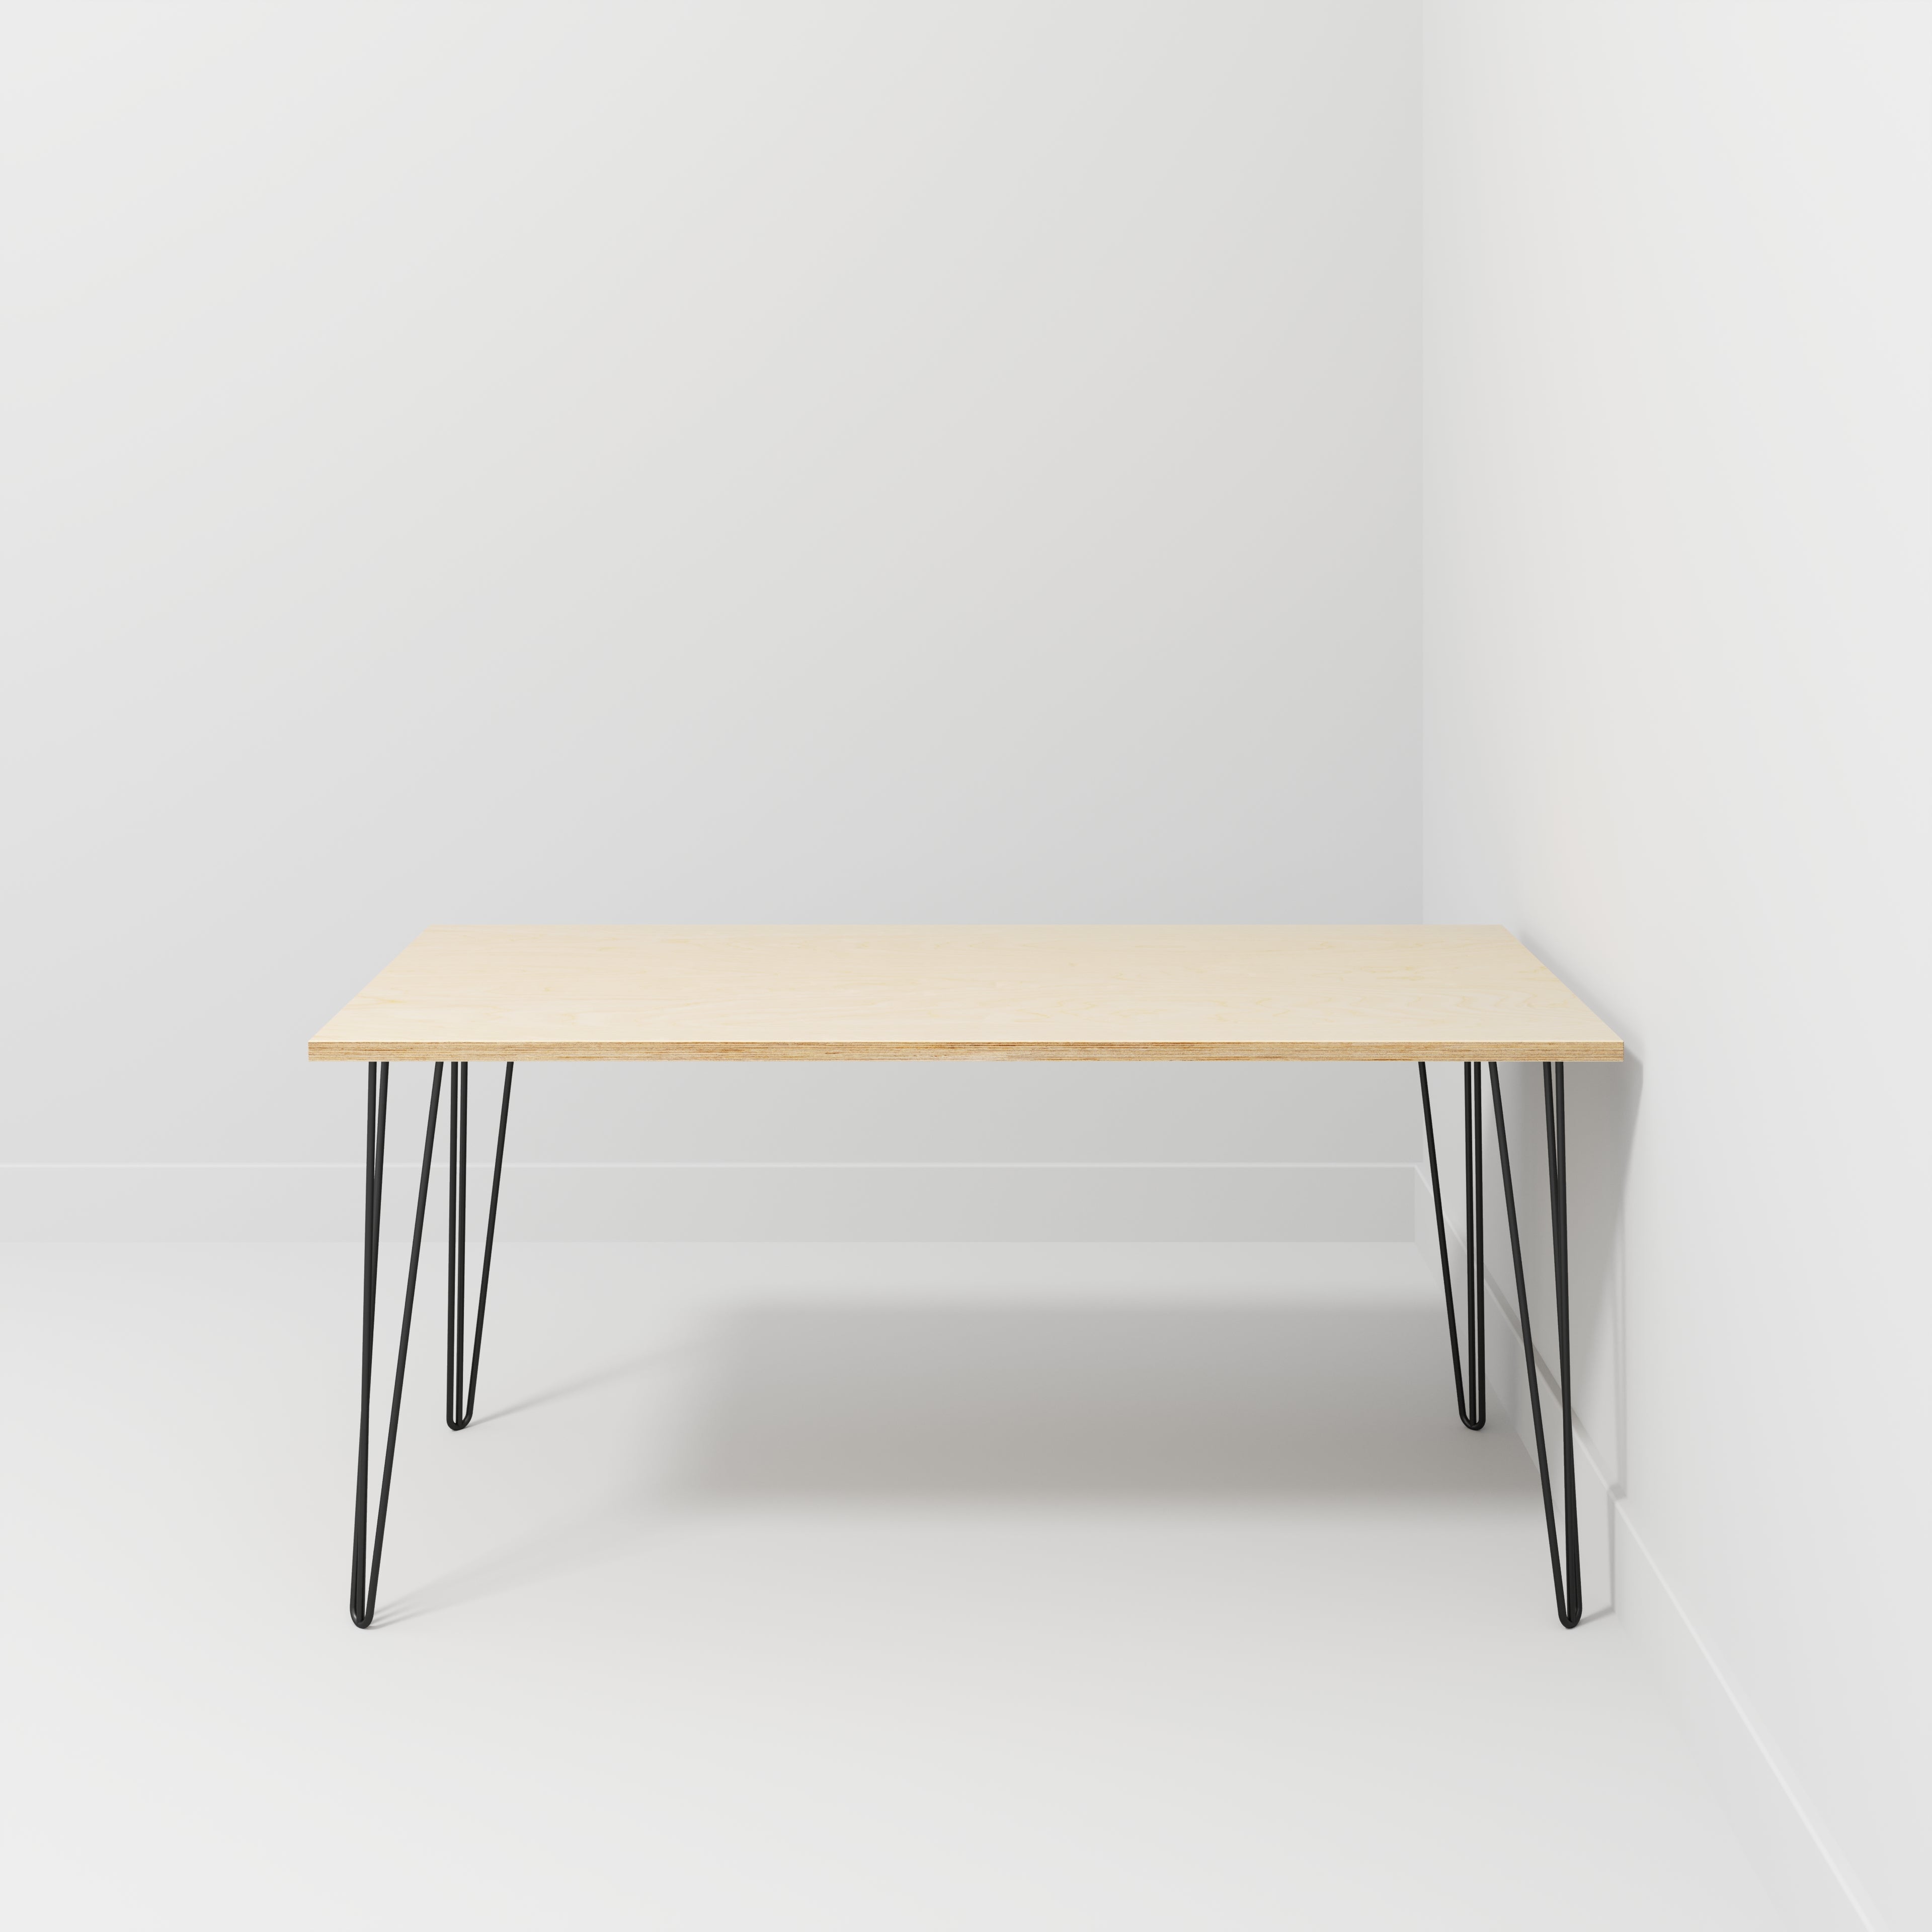 Custom Plywood Table with Hairpin Legs